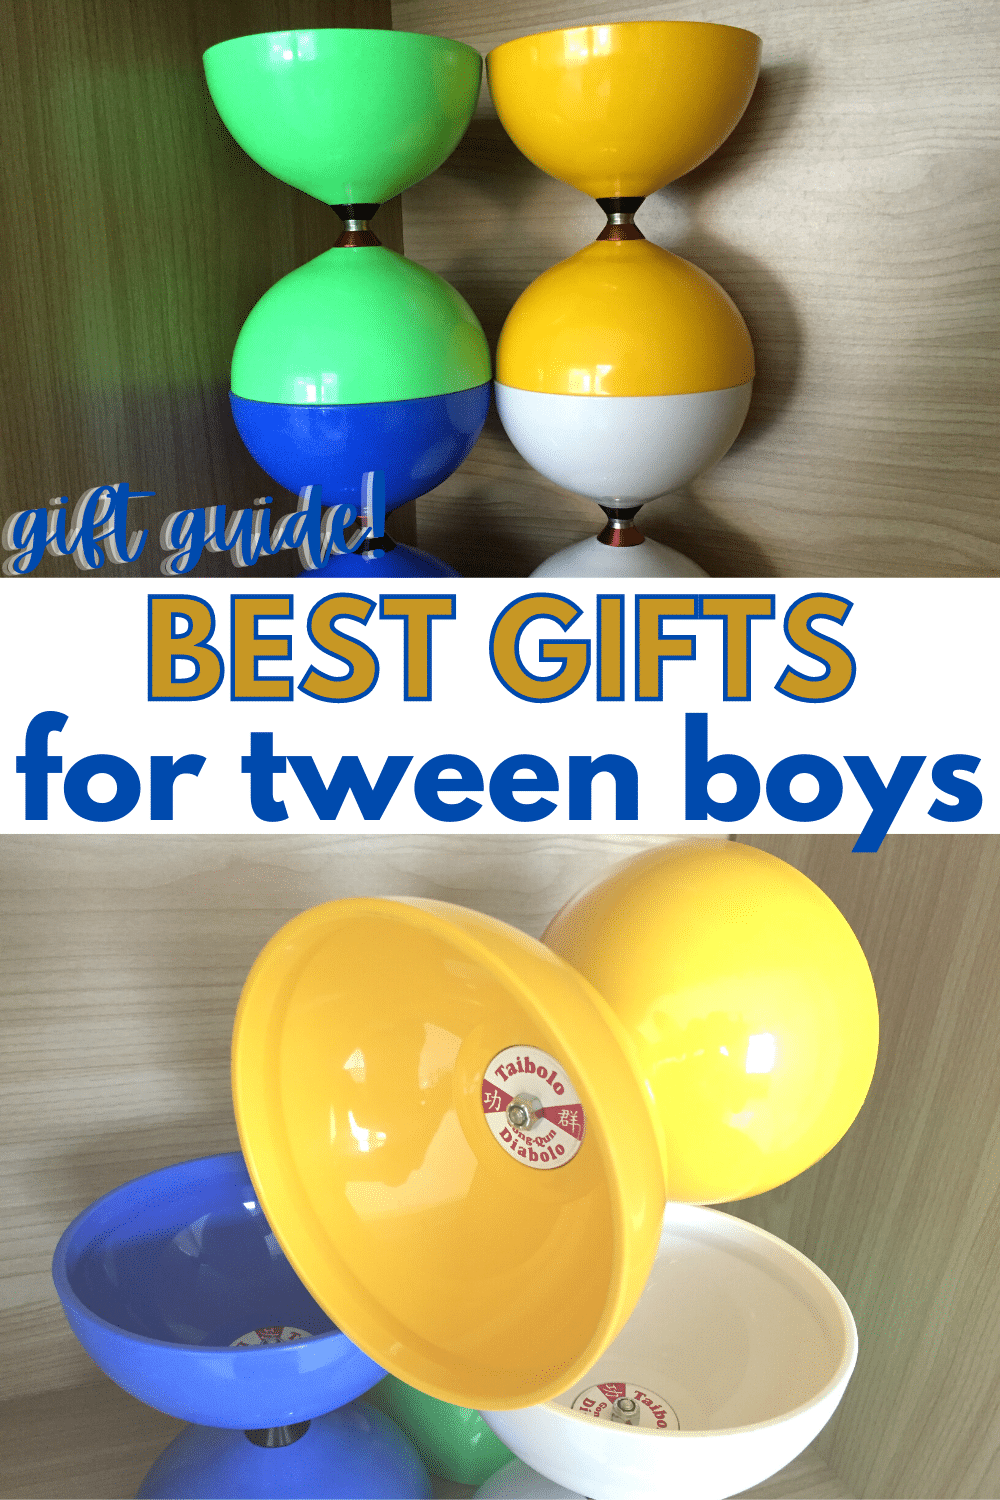 Tweens are hard to shop for. They aren't kids anymore, but they still like to play. Here's a list of the best gifts for tween boys. #giftguide #giftideas #tweens #tweenboys via @wondermomwannab